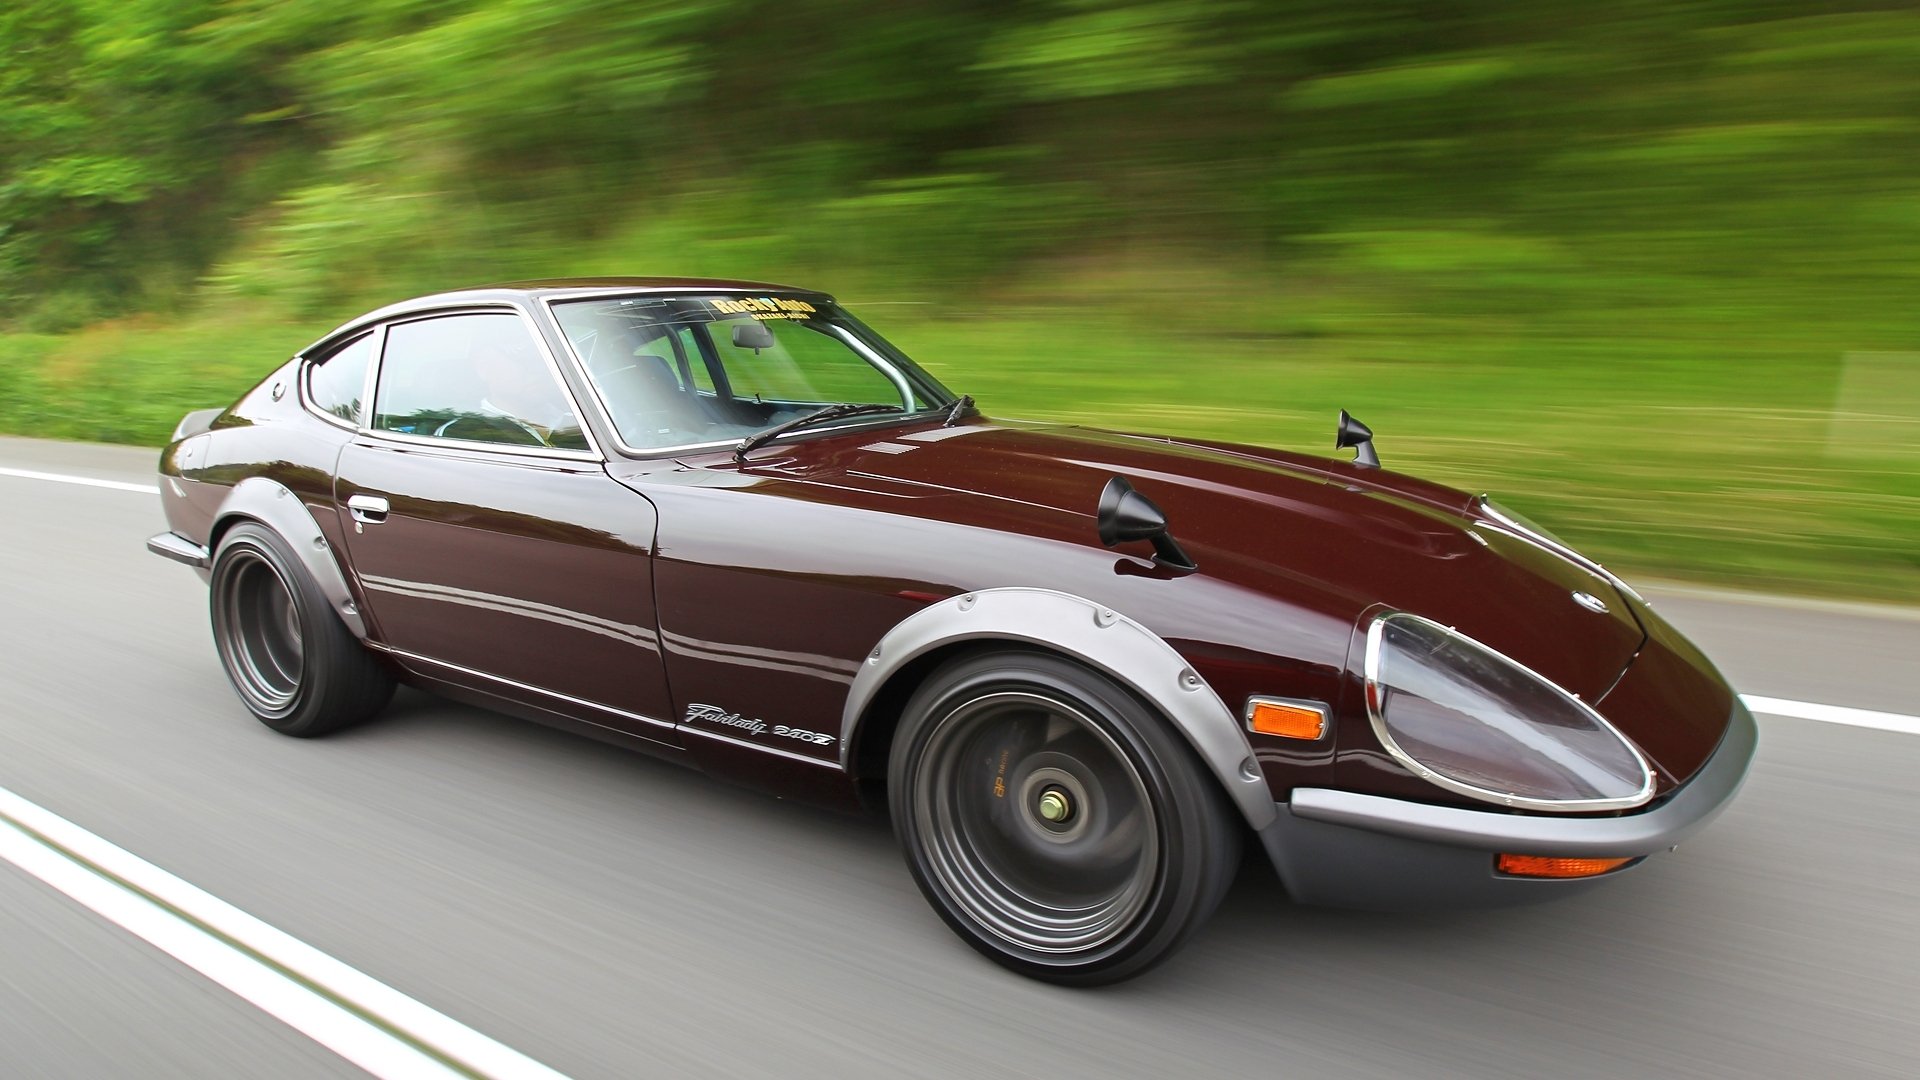 Nissan Fairlady Z Hd Wallpapers Background Images